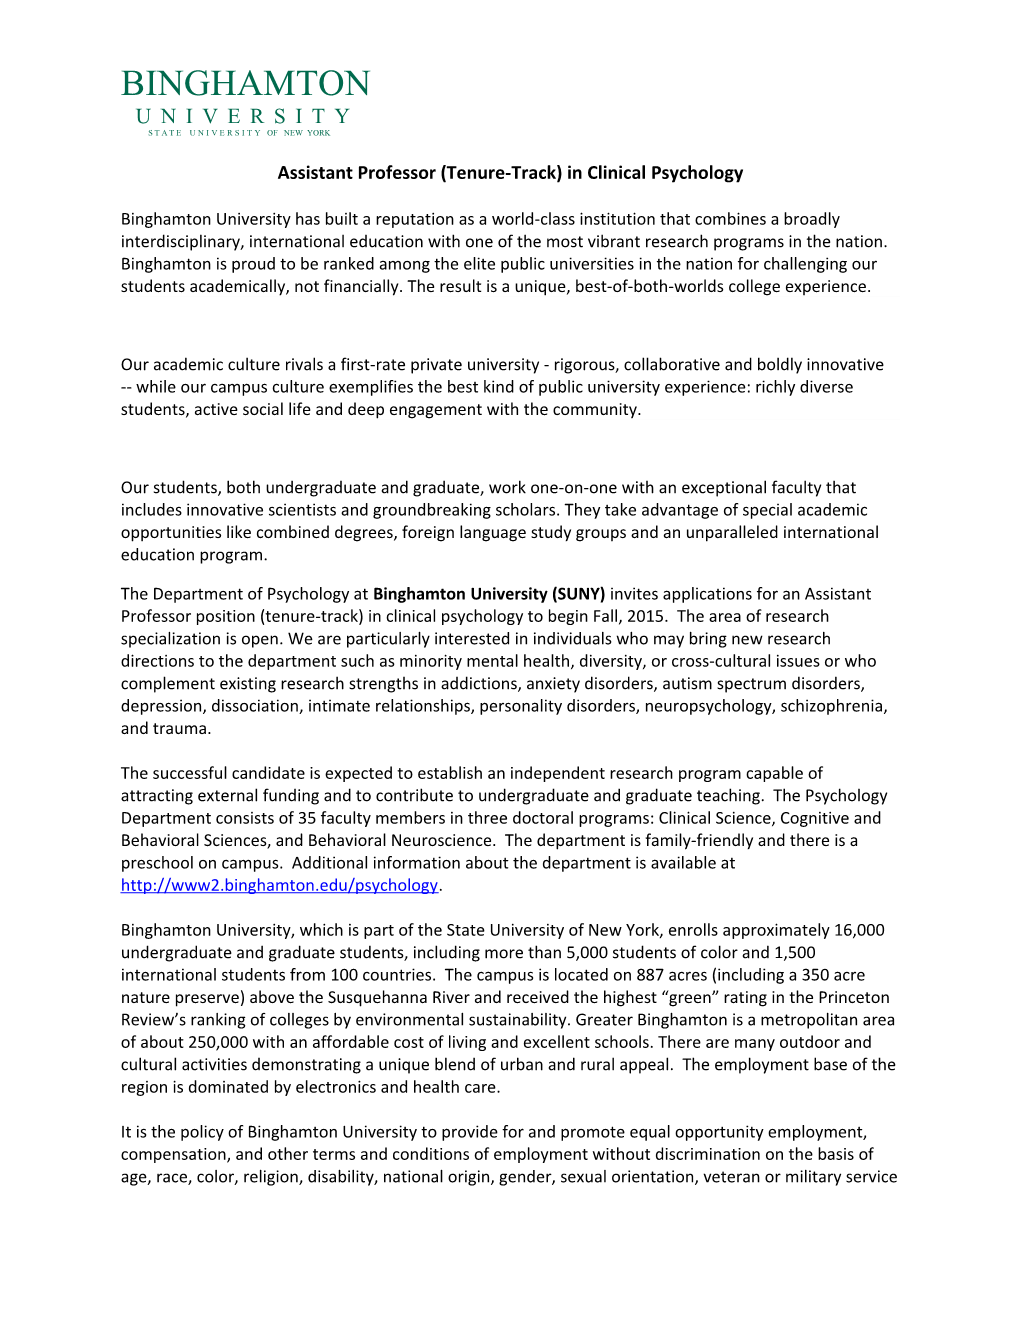 Assistant Professor (Tenure-Track) in Clinical Psychology